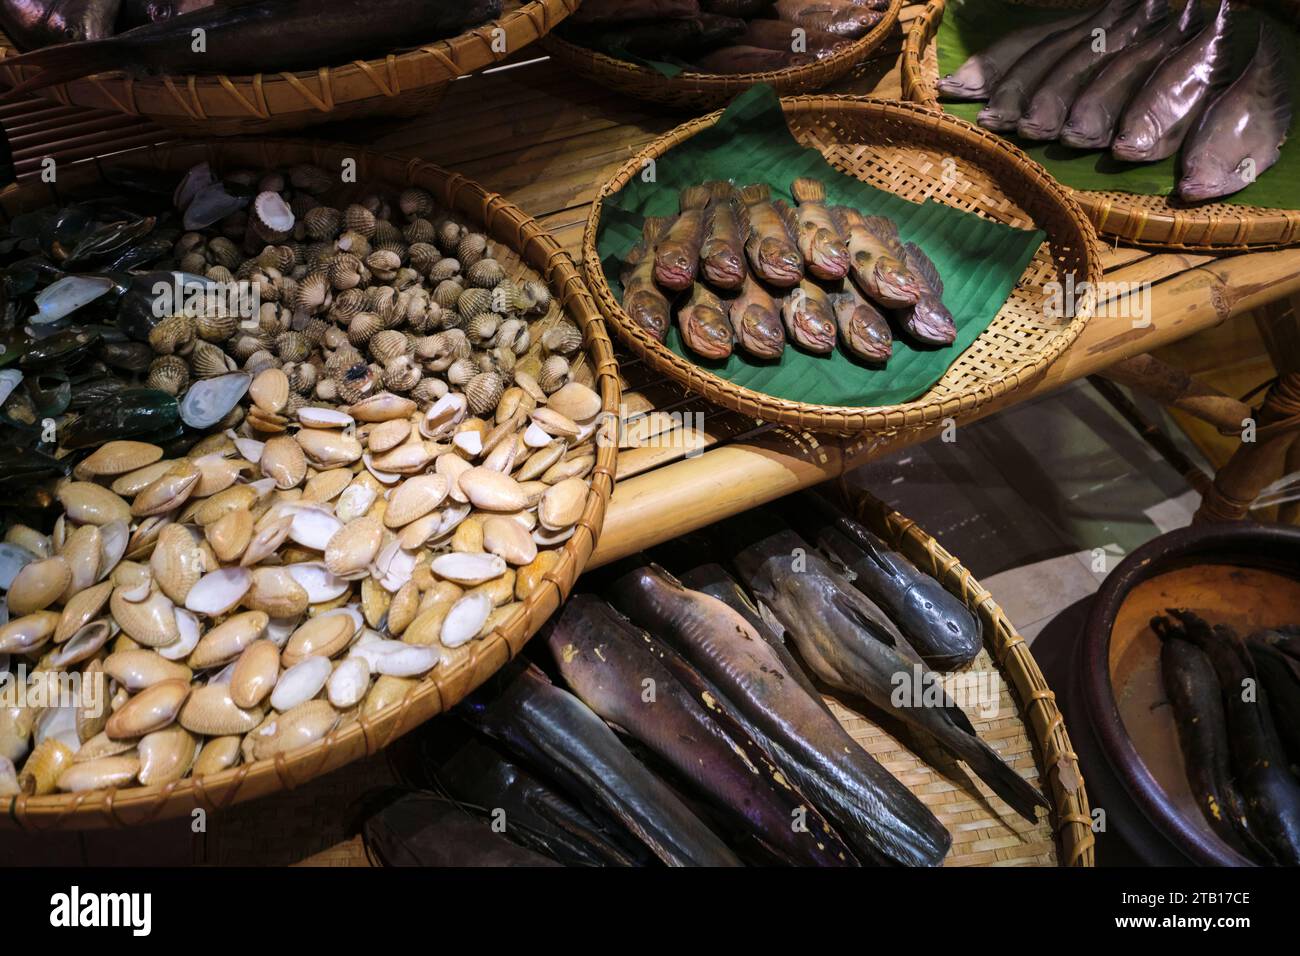 https://c8.alamy.com/comp/2TB17CE/a-recreation-with-fake-plastic-fish-clams-seafood-typically-sold-at-a-traditional-local-market-at-the-siriraj-bimuksthan-museum-in-bangkok-thai-2TB17CE.jpg